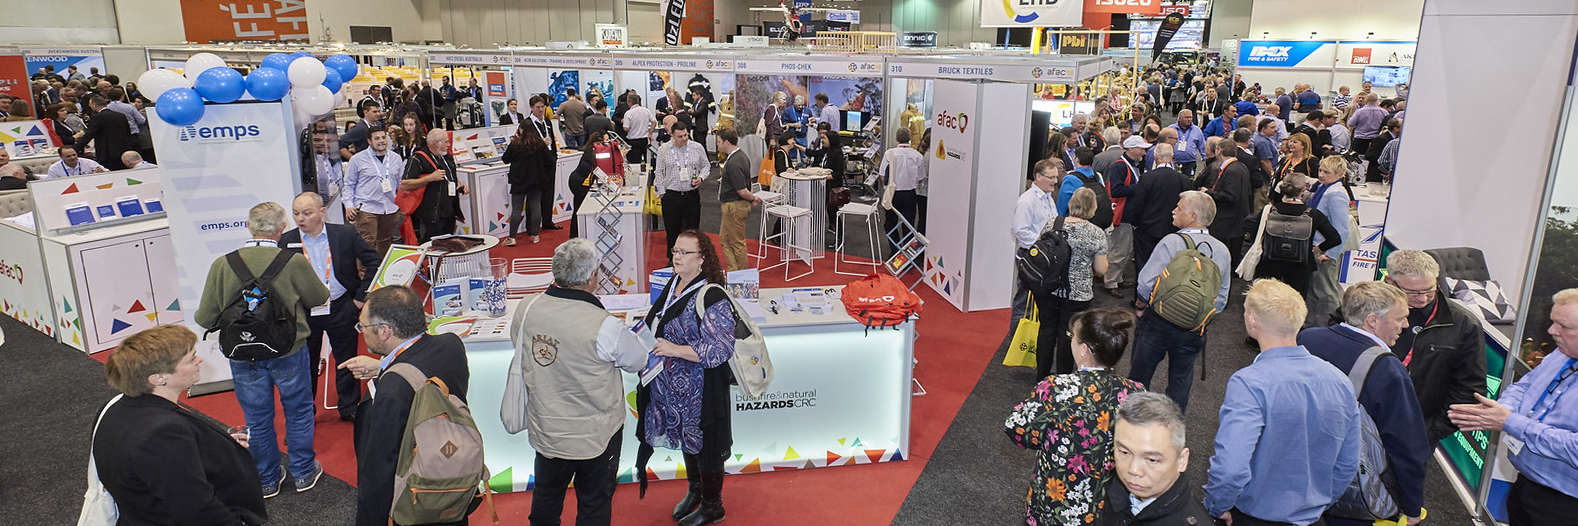 Crowd at AFAC18 trade exhibition